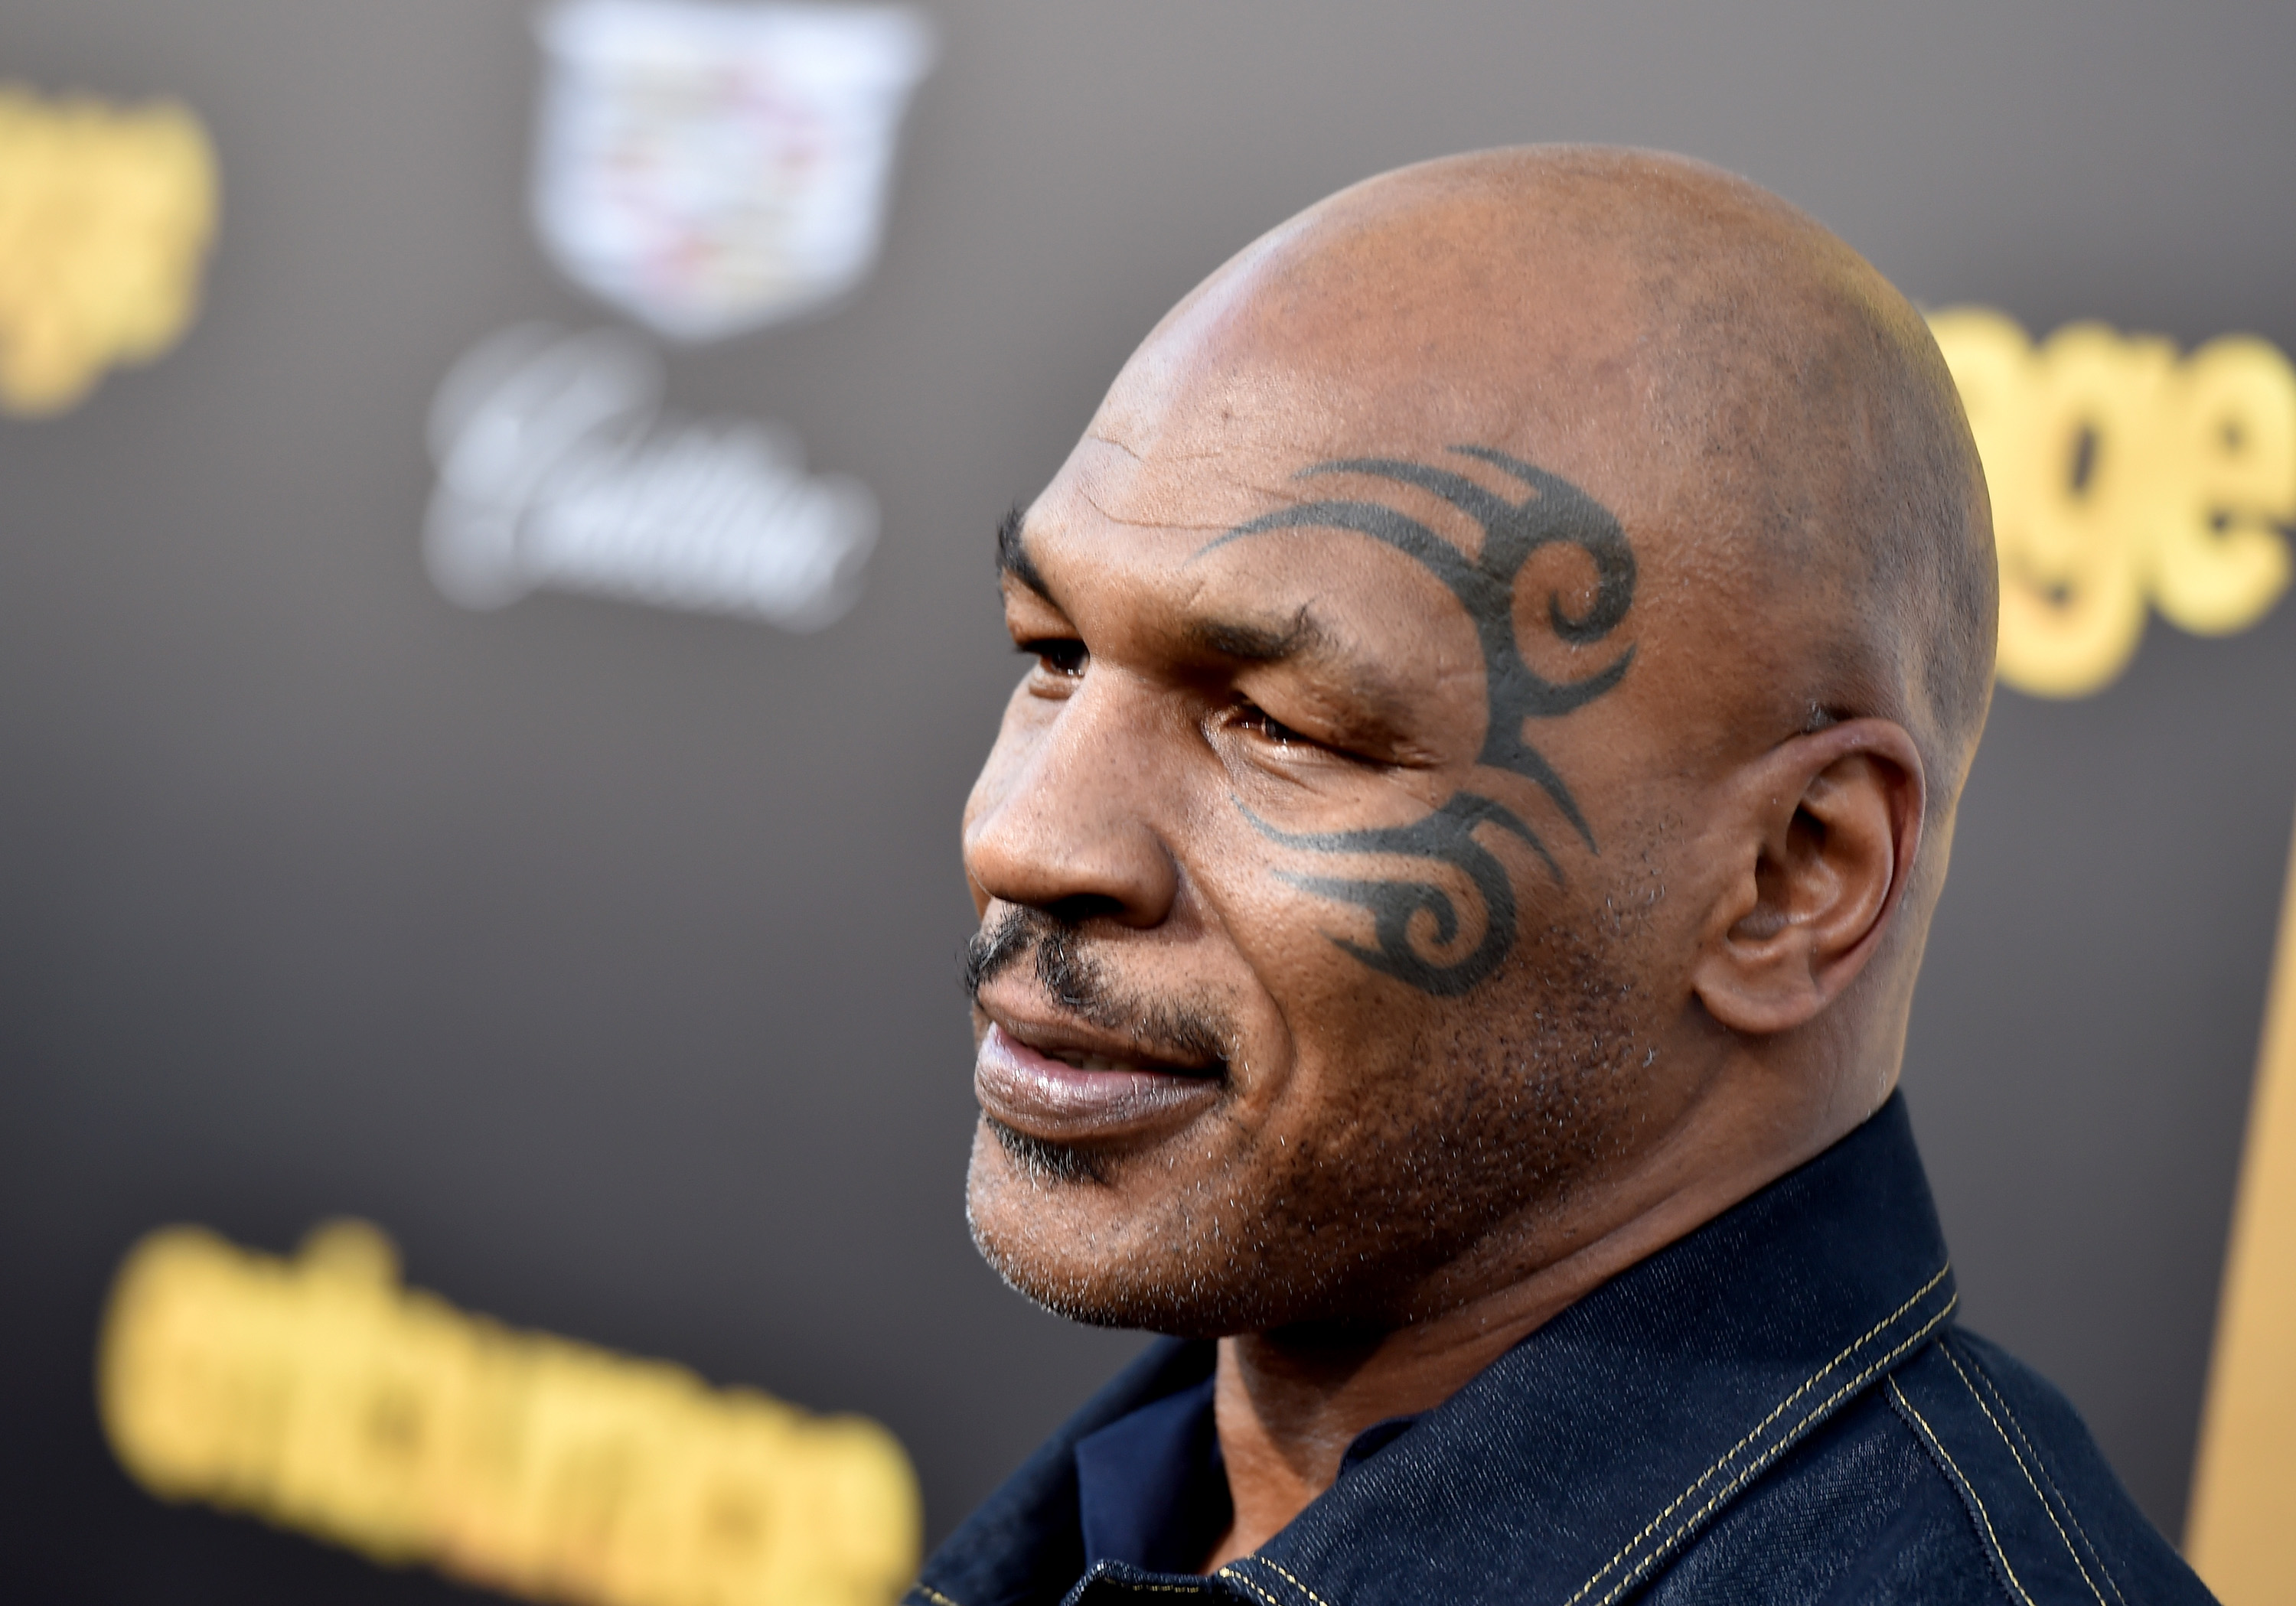 Mike Tyson said he believes death is more glorious than life.